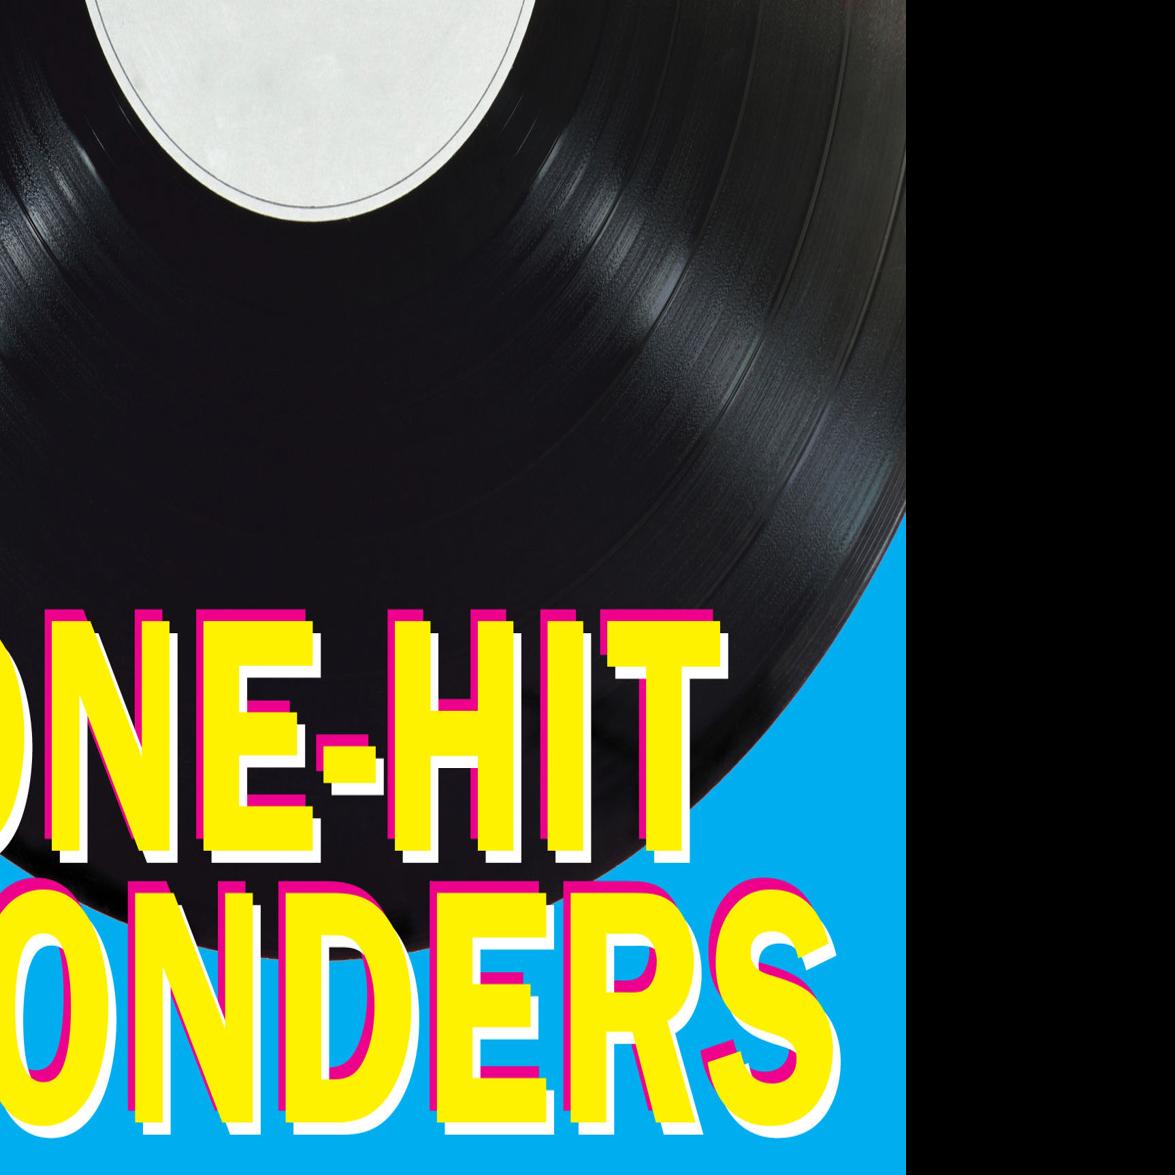 Reader Poll Of All The One Hit Wonders Which One Is No 1 - blox music cradles